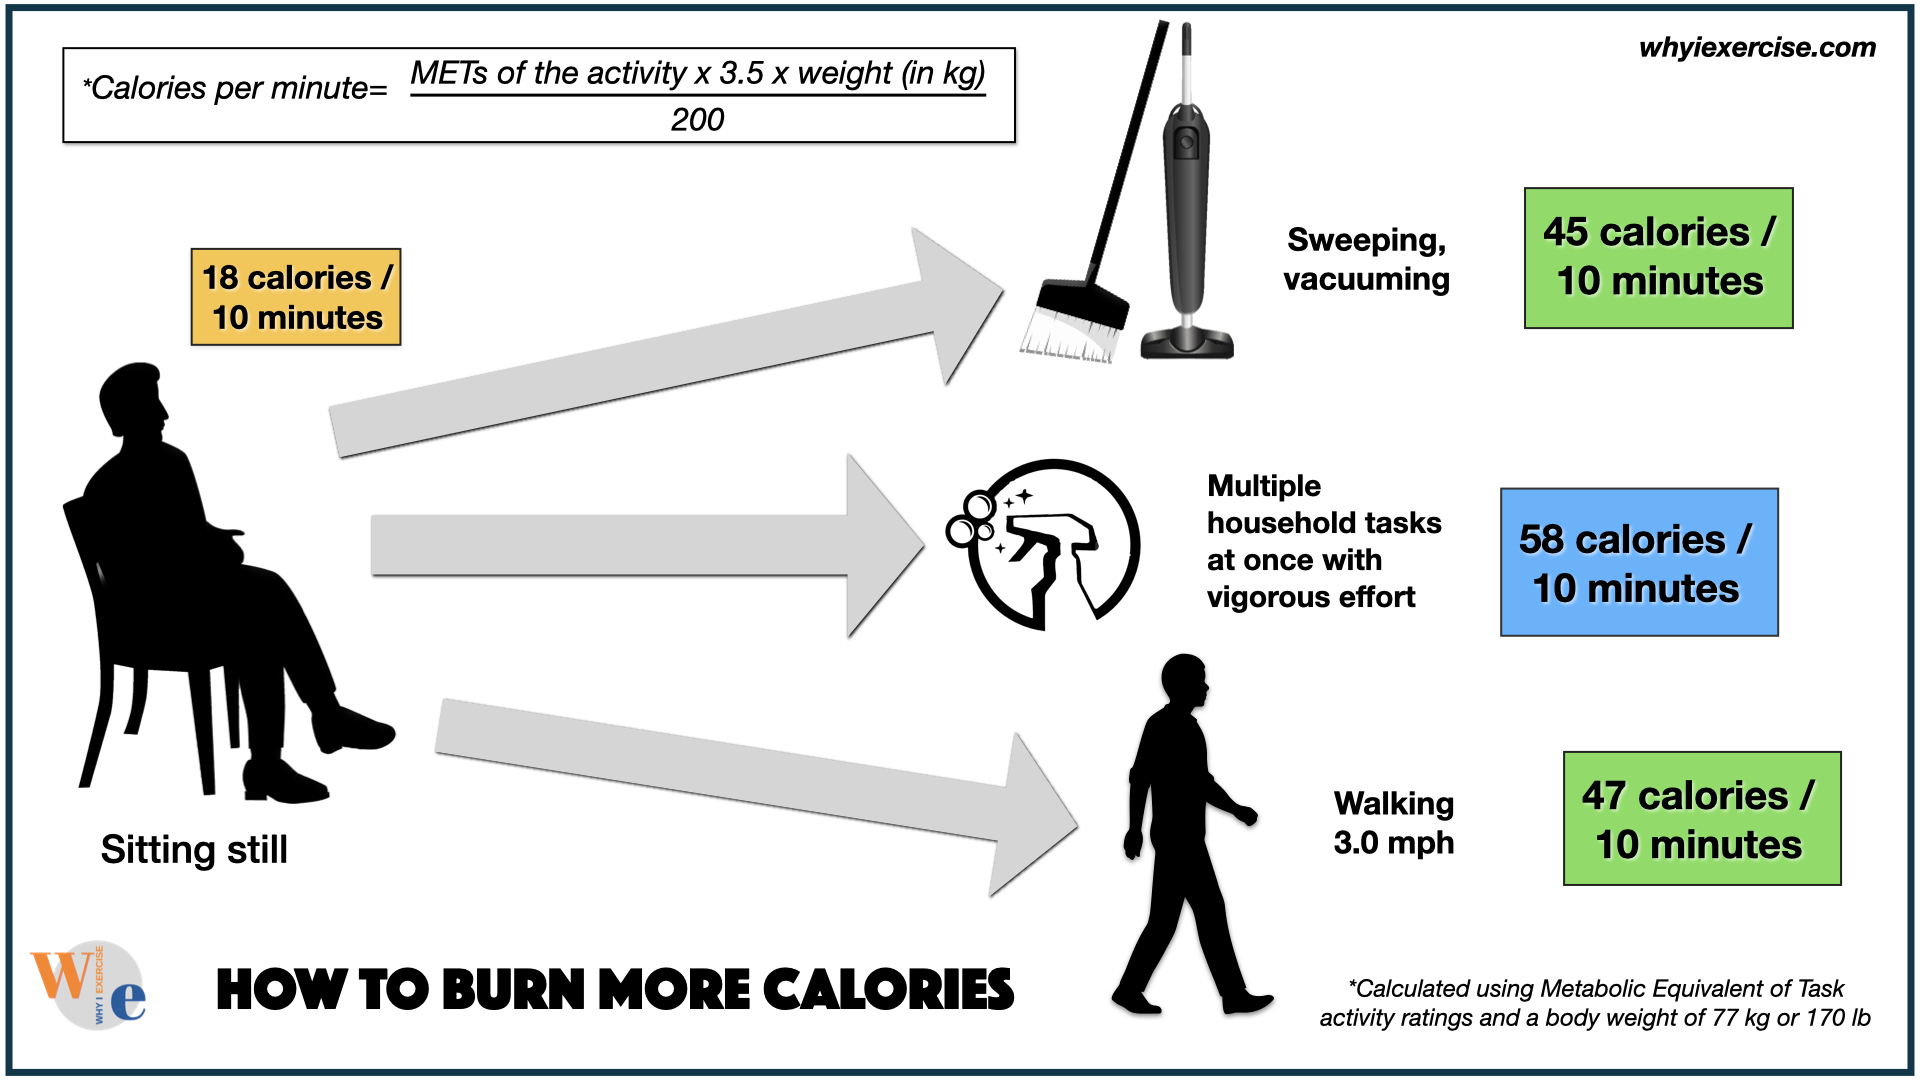 how to burn more calories with light exercise